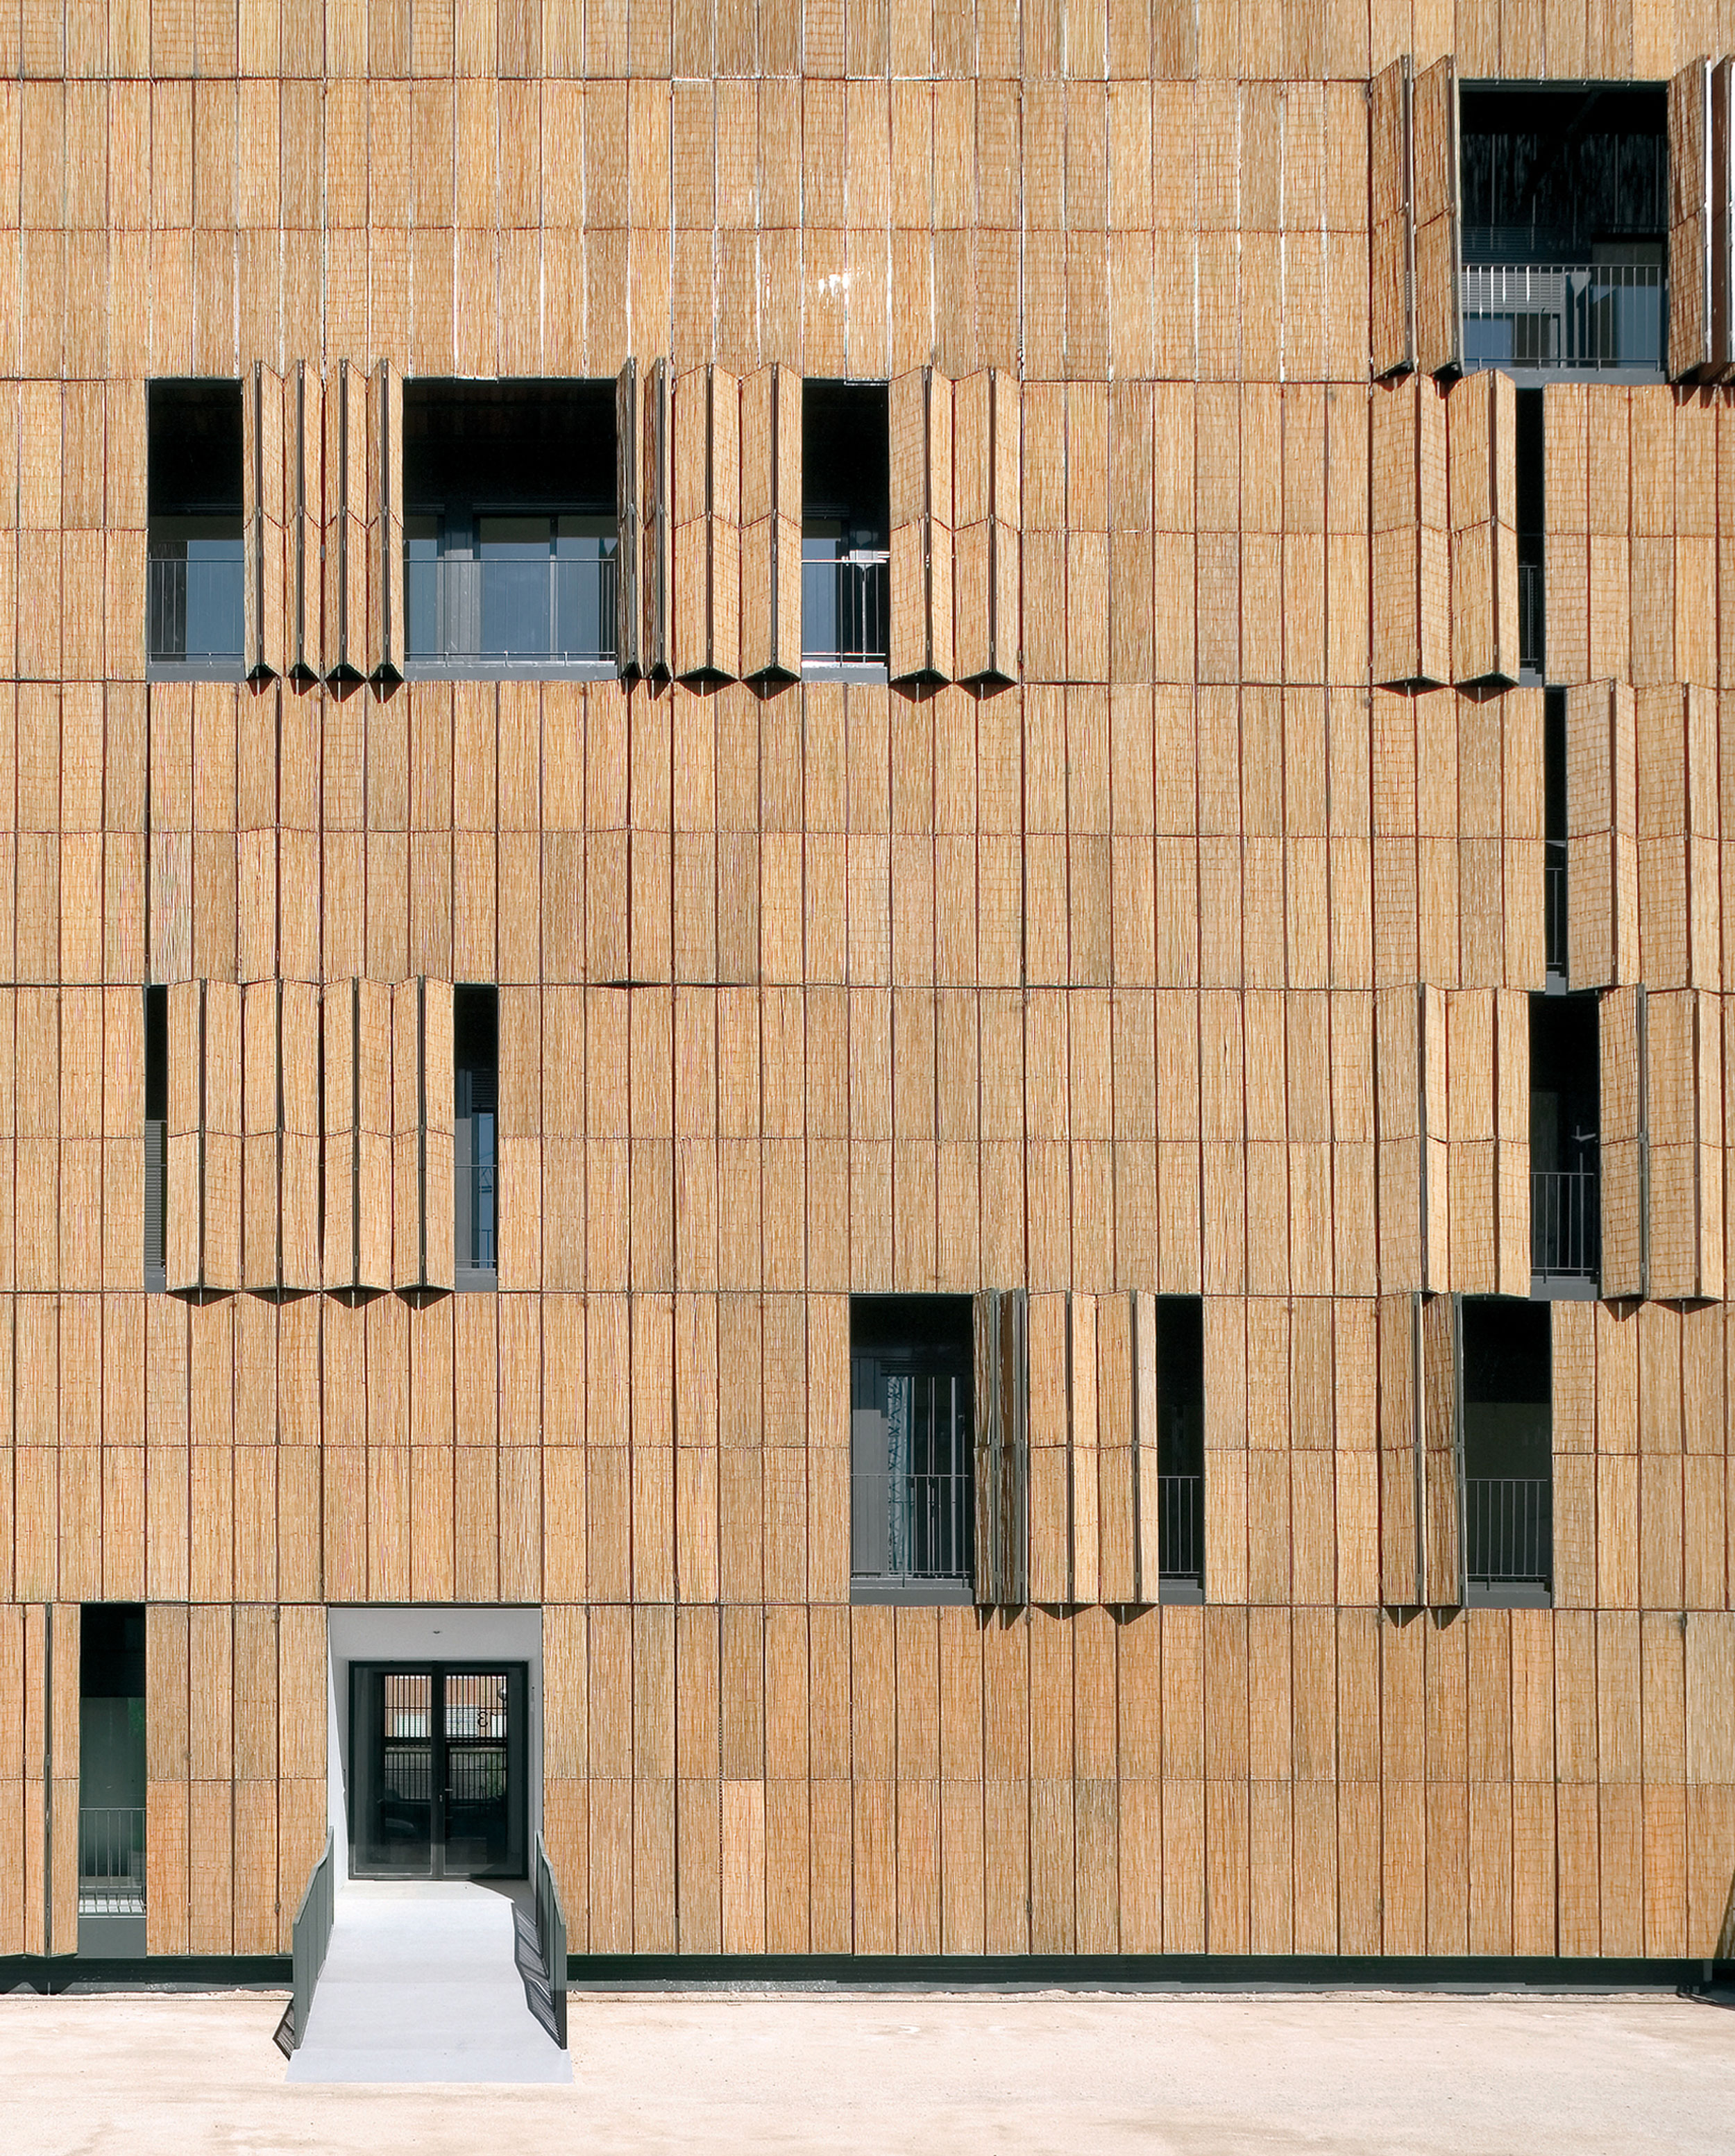 88 Social Housing in Carabanchel, Madrid - FOA | Foreign Office Architects  | Arquitectura Viva